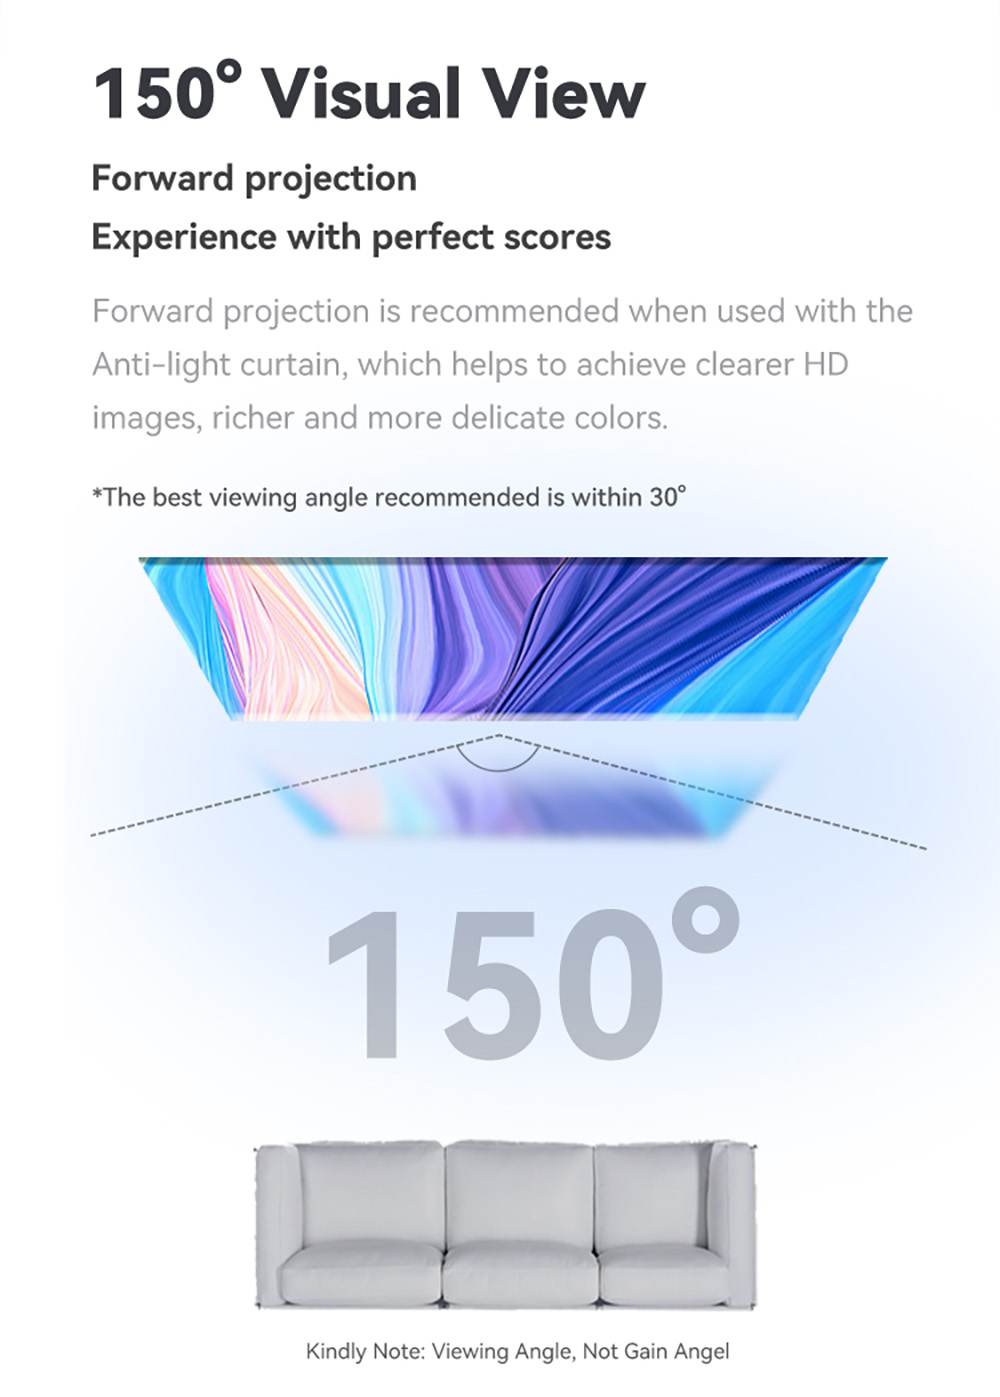 WANBO HD Anti-Light Projection Screen, 150° Visual View, 30° Visual Gain Angle, 1.8 Times Color Gain